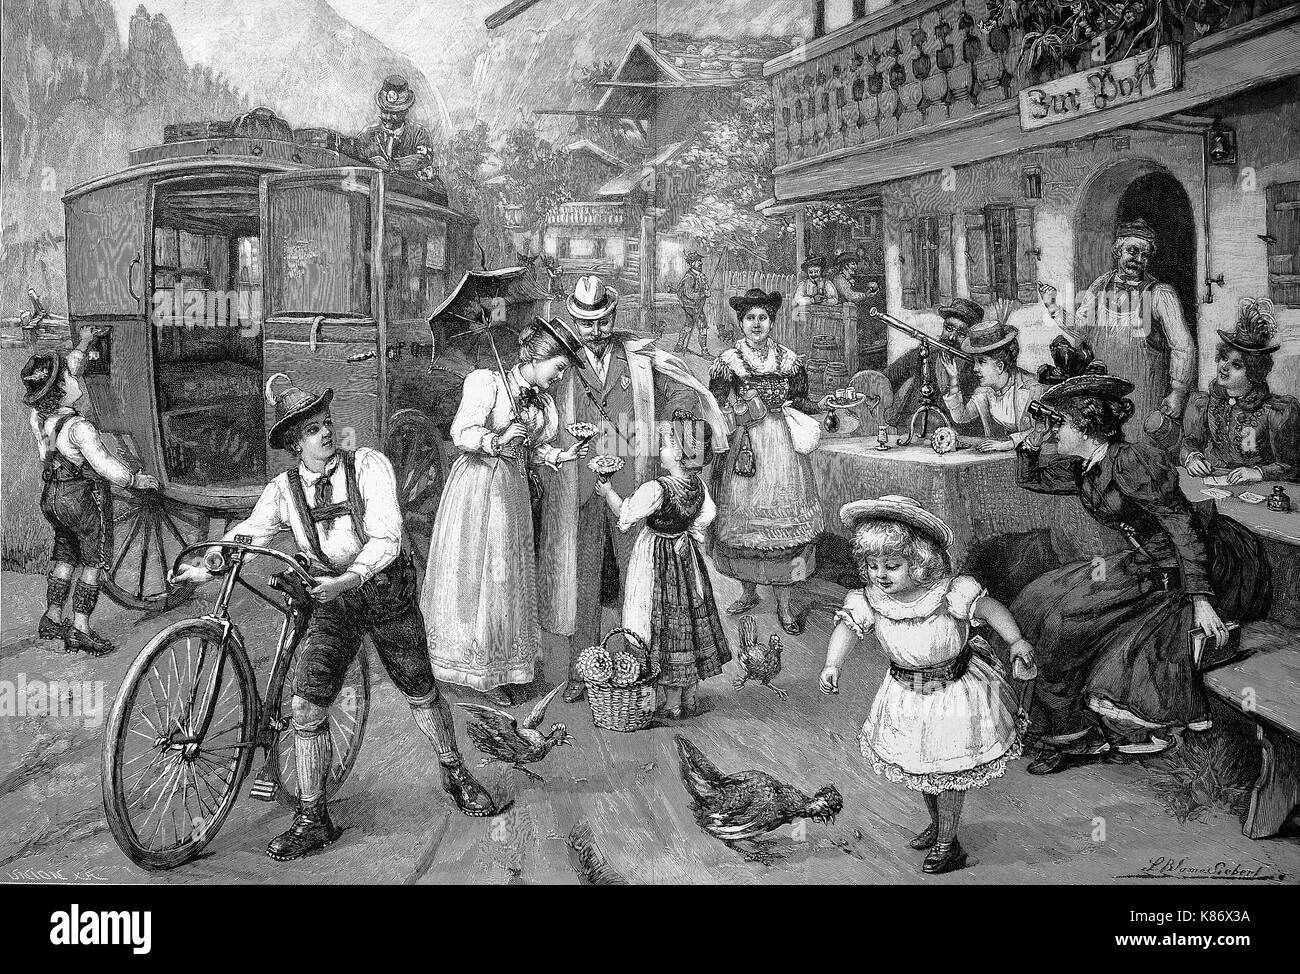 a couple from Berlin comes to summer vacation in Bavaria, Germany, 1898, other tourists sit in front of a tavern, Digital improved reproduction of an original woodprint from the 19th century Stock Photo